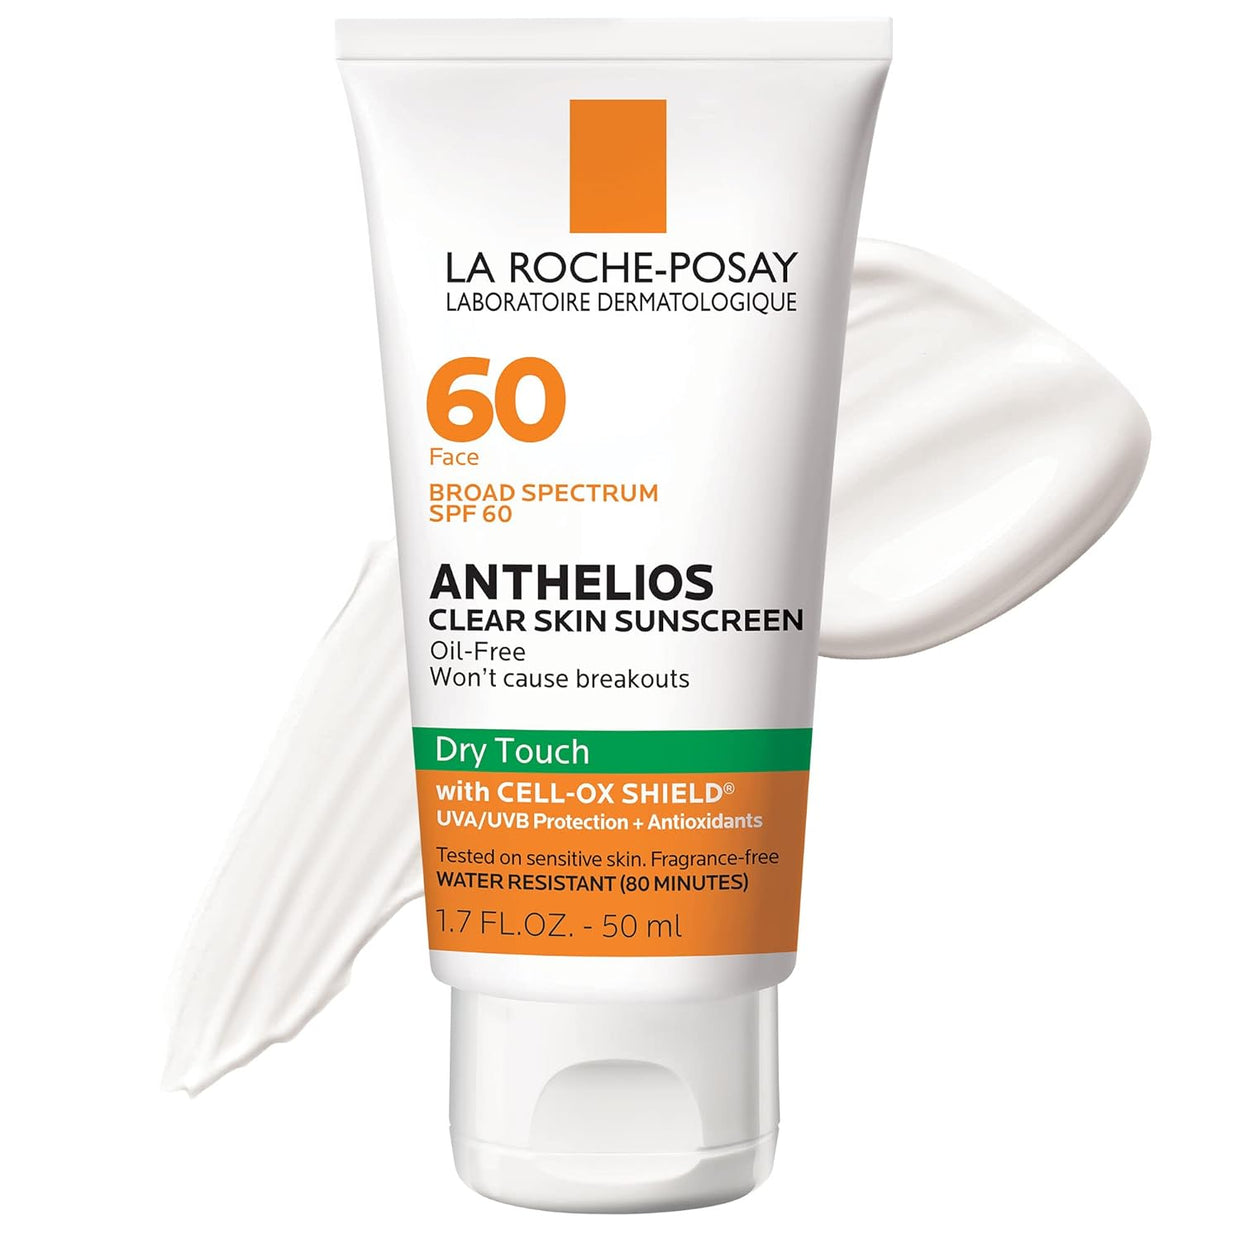 La Roche-Posay Anthelios Clear Skin Oil Free Sunscreen SPF 60 1.7 fl. oz. shop at Exclusive Beauty